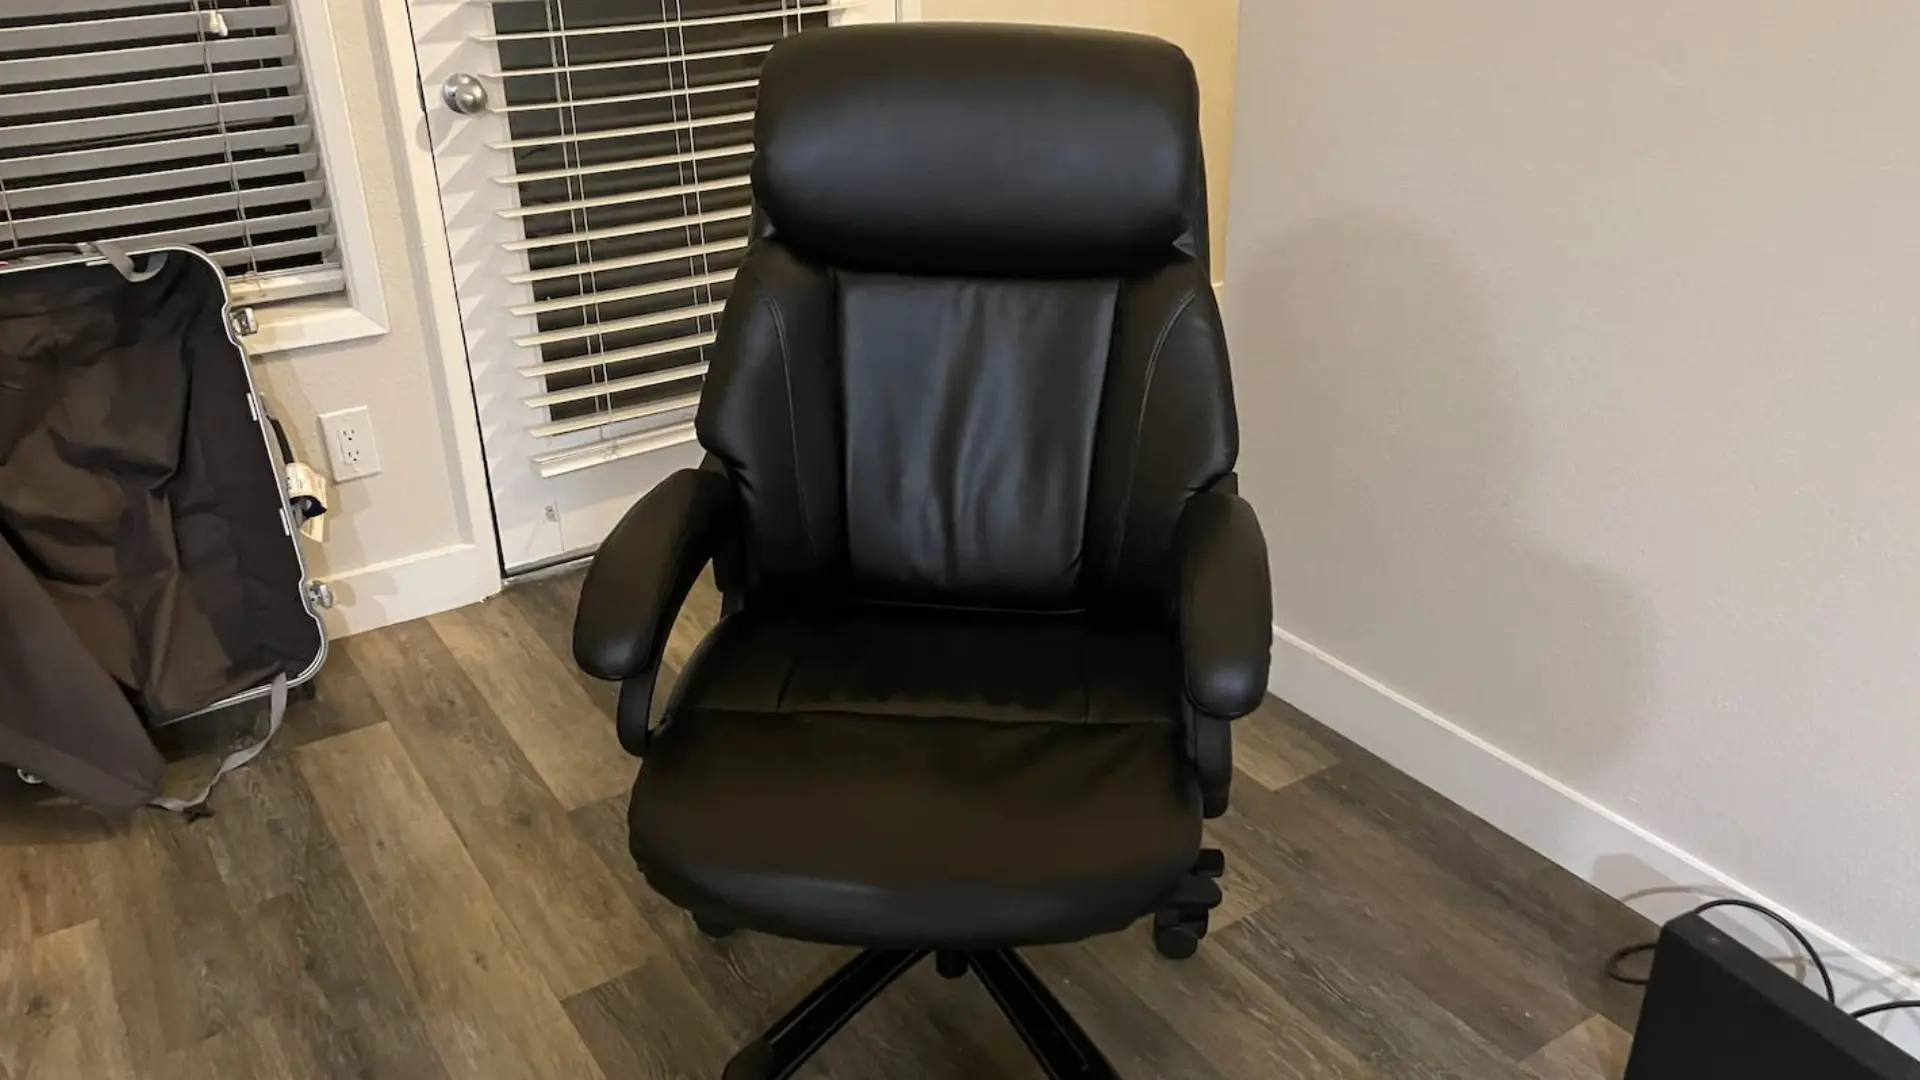 Starspace High-Back Big & Tall Office Chair